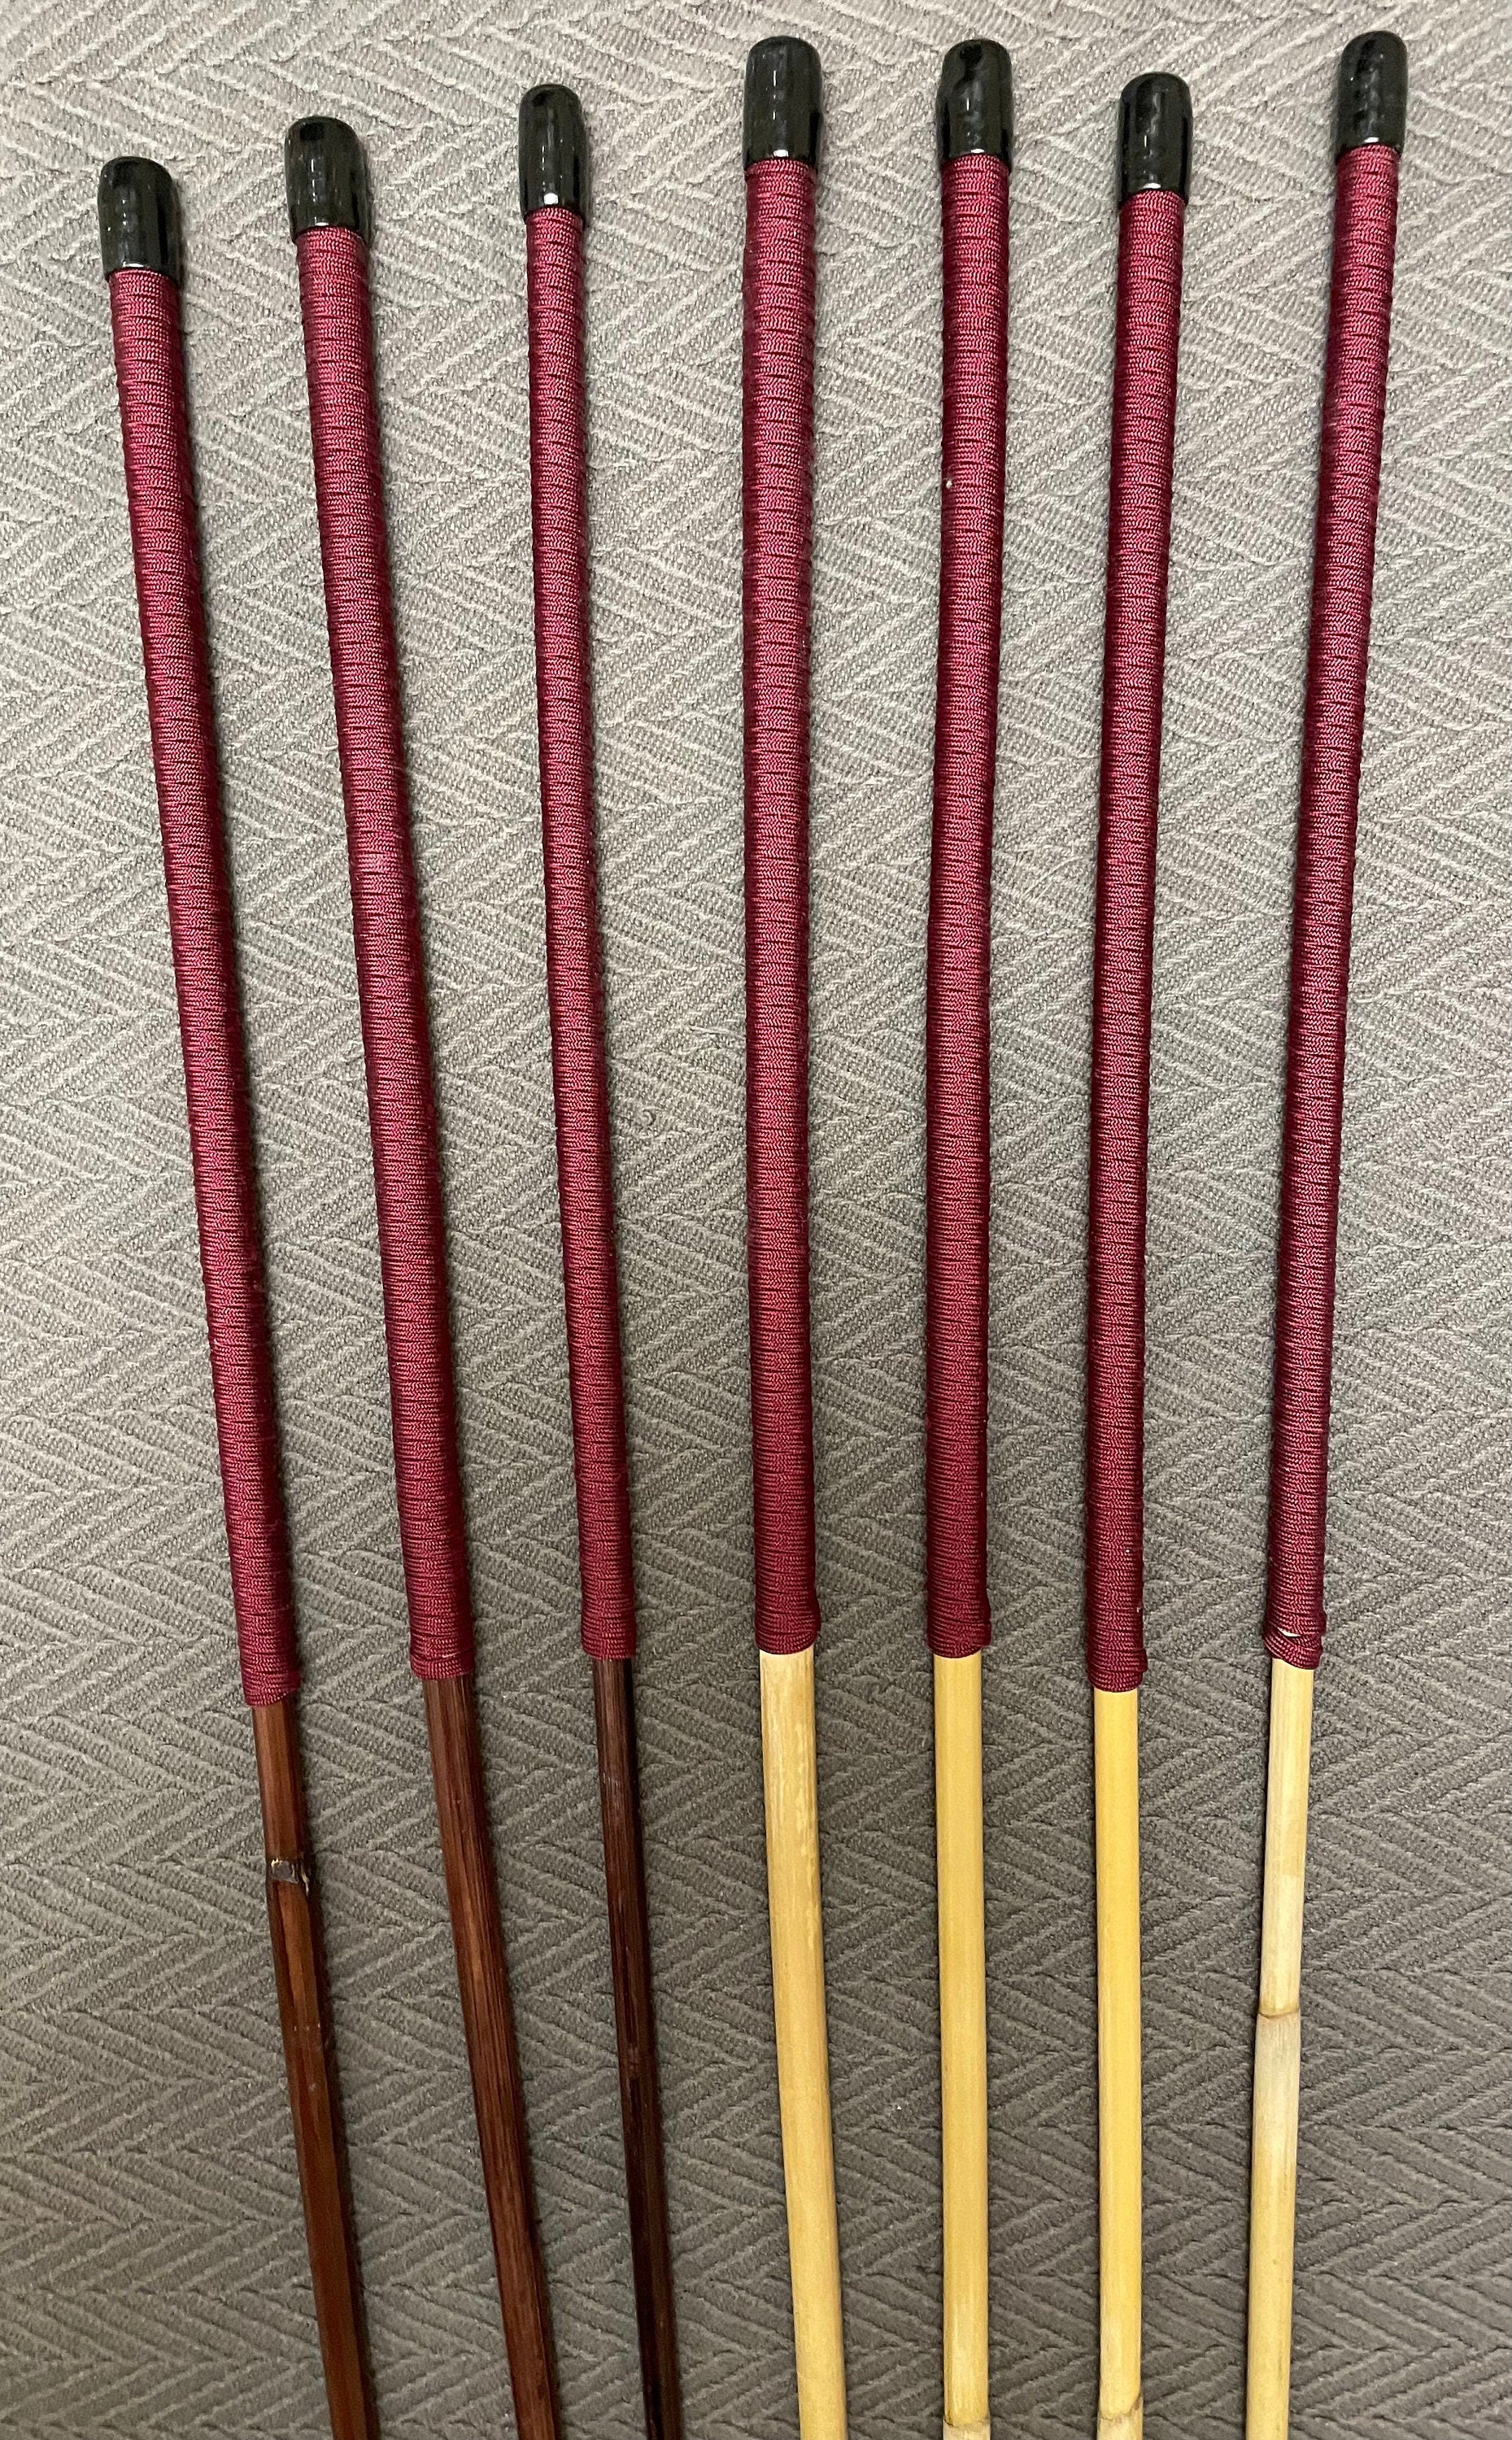 Set of 7 Classic Dragon / Smoked Dragon Canes -  90 to 95 cms Length - Burgundy Paracord Handles